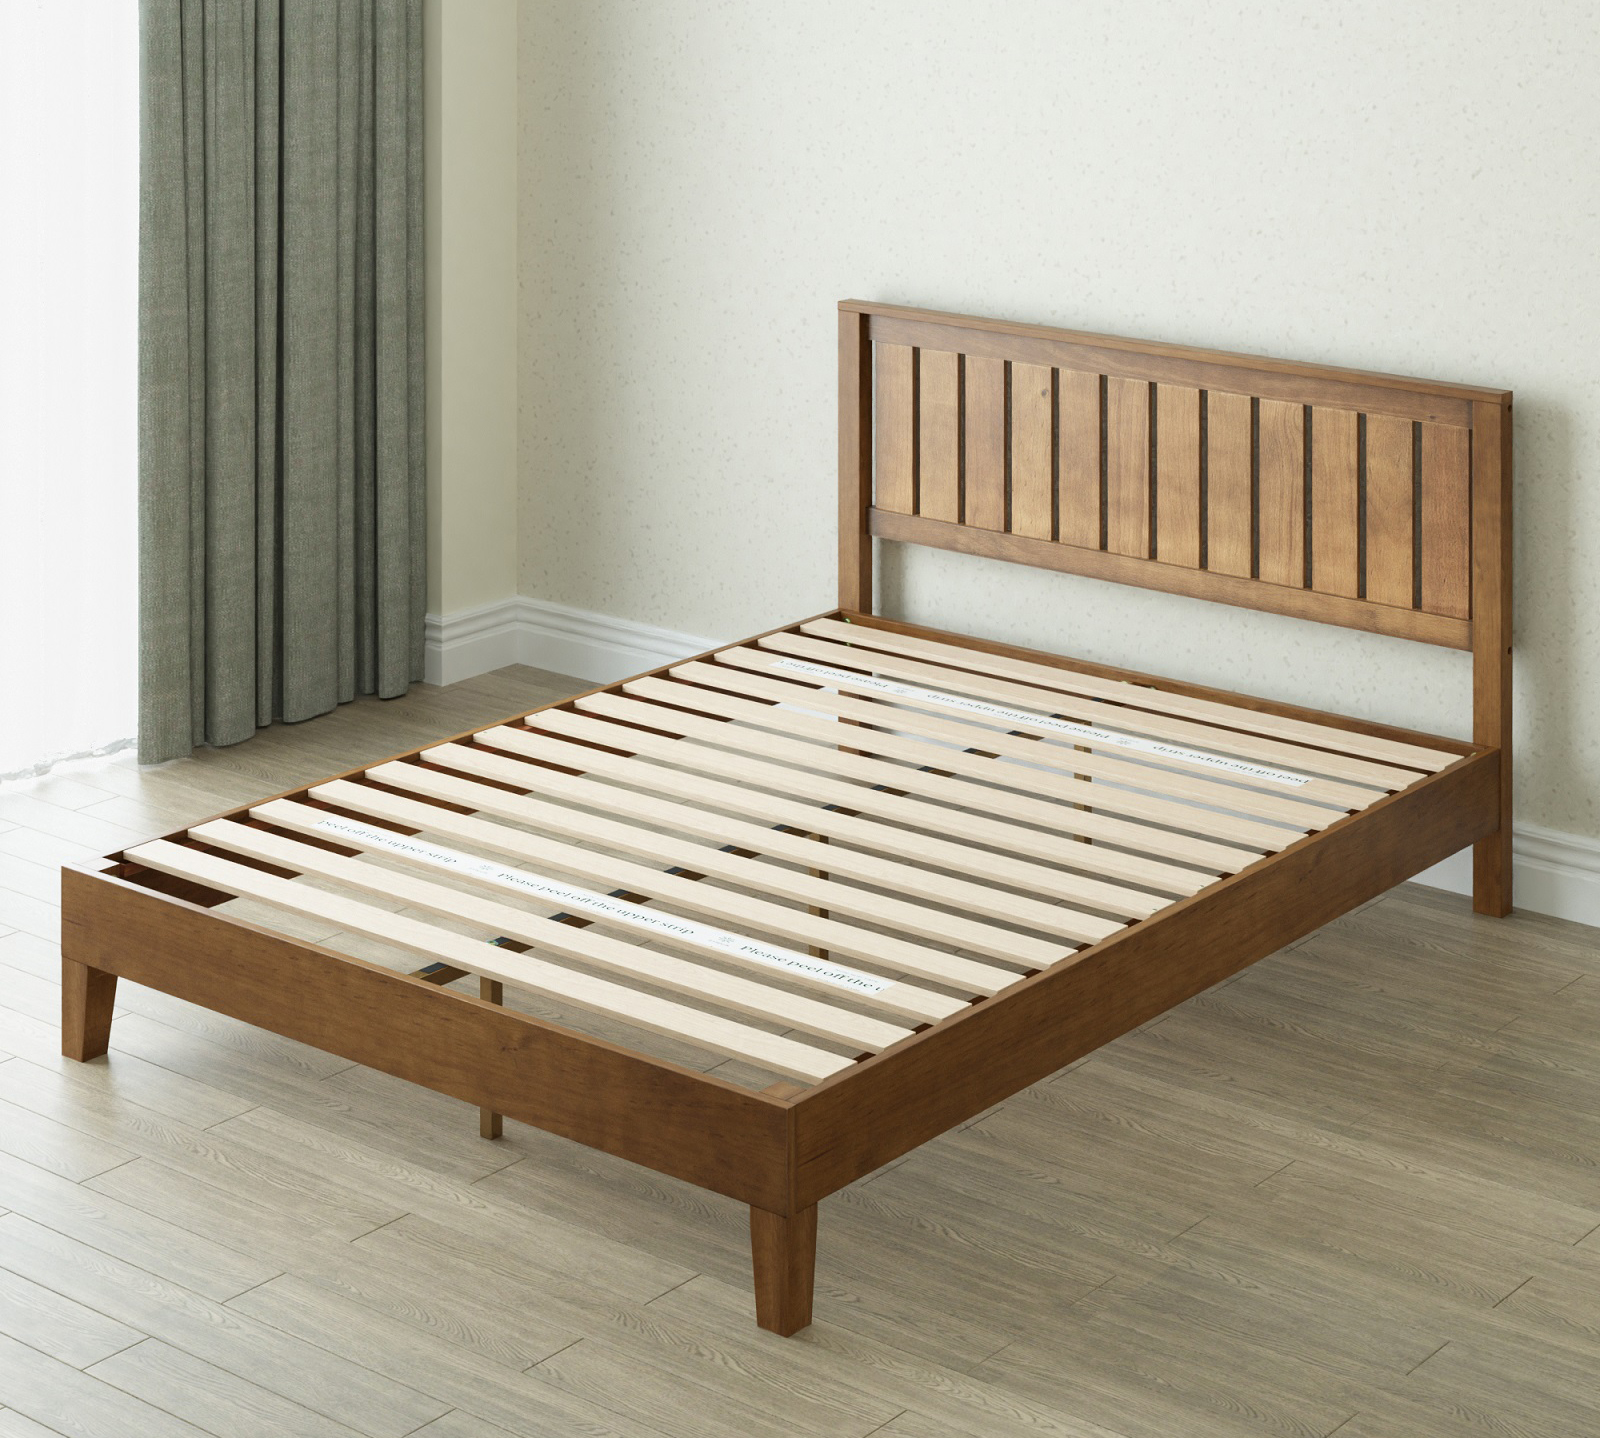 Zinus Full Alexis 37 Deluxe Wood Platform Bed Frame with Headboard